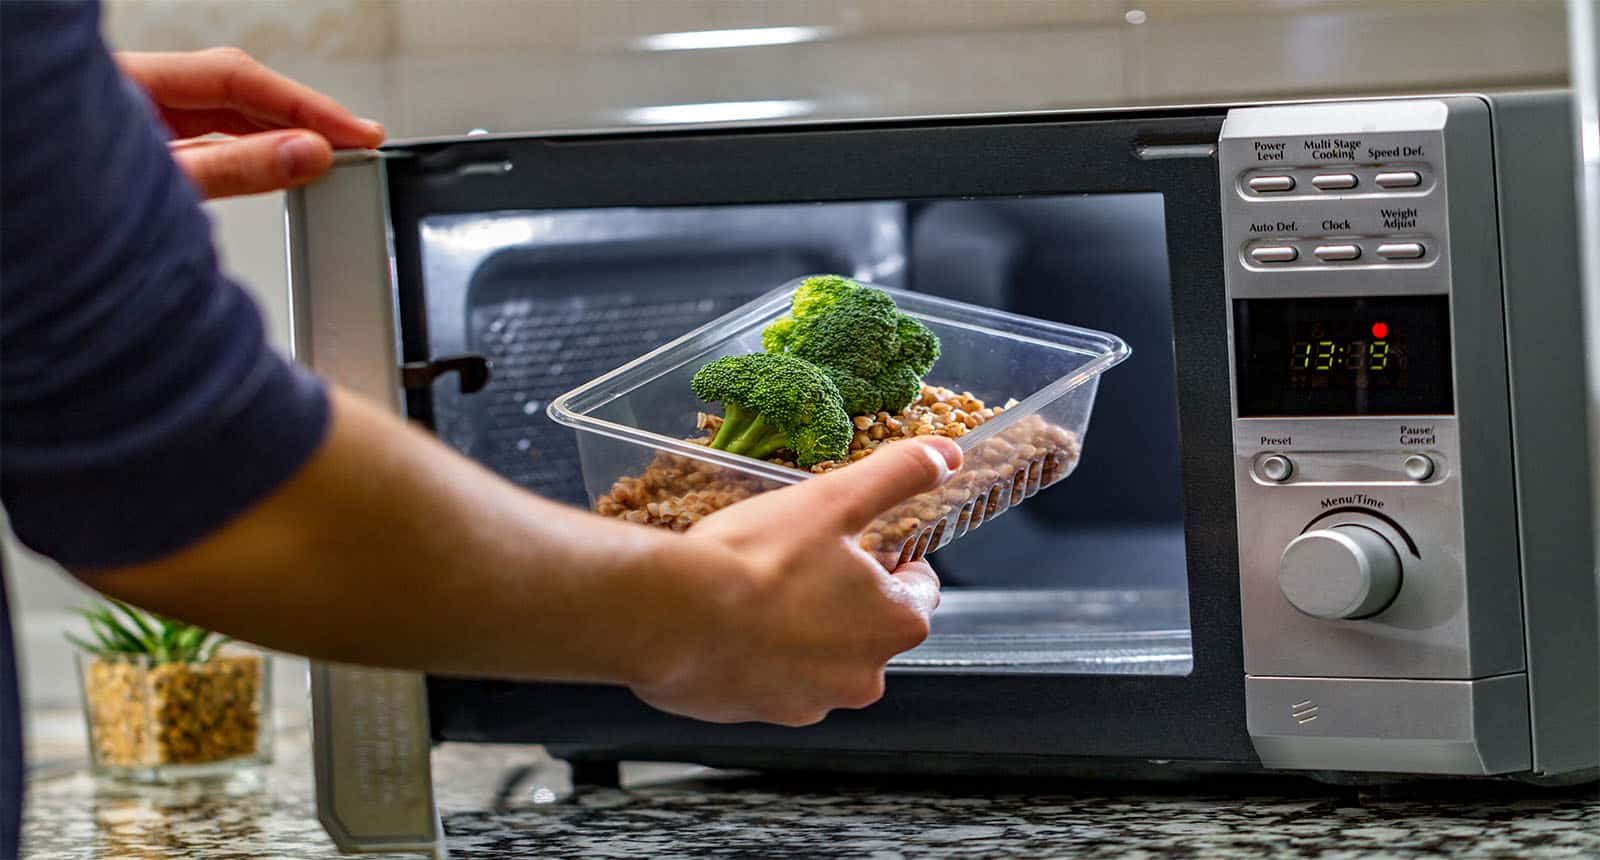 convection microwave oven